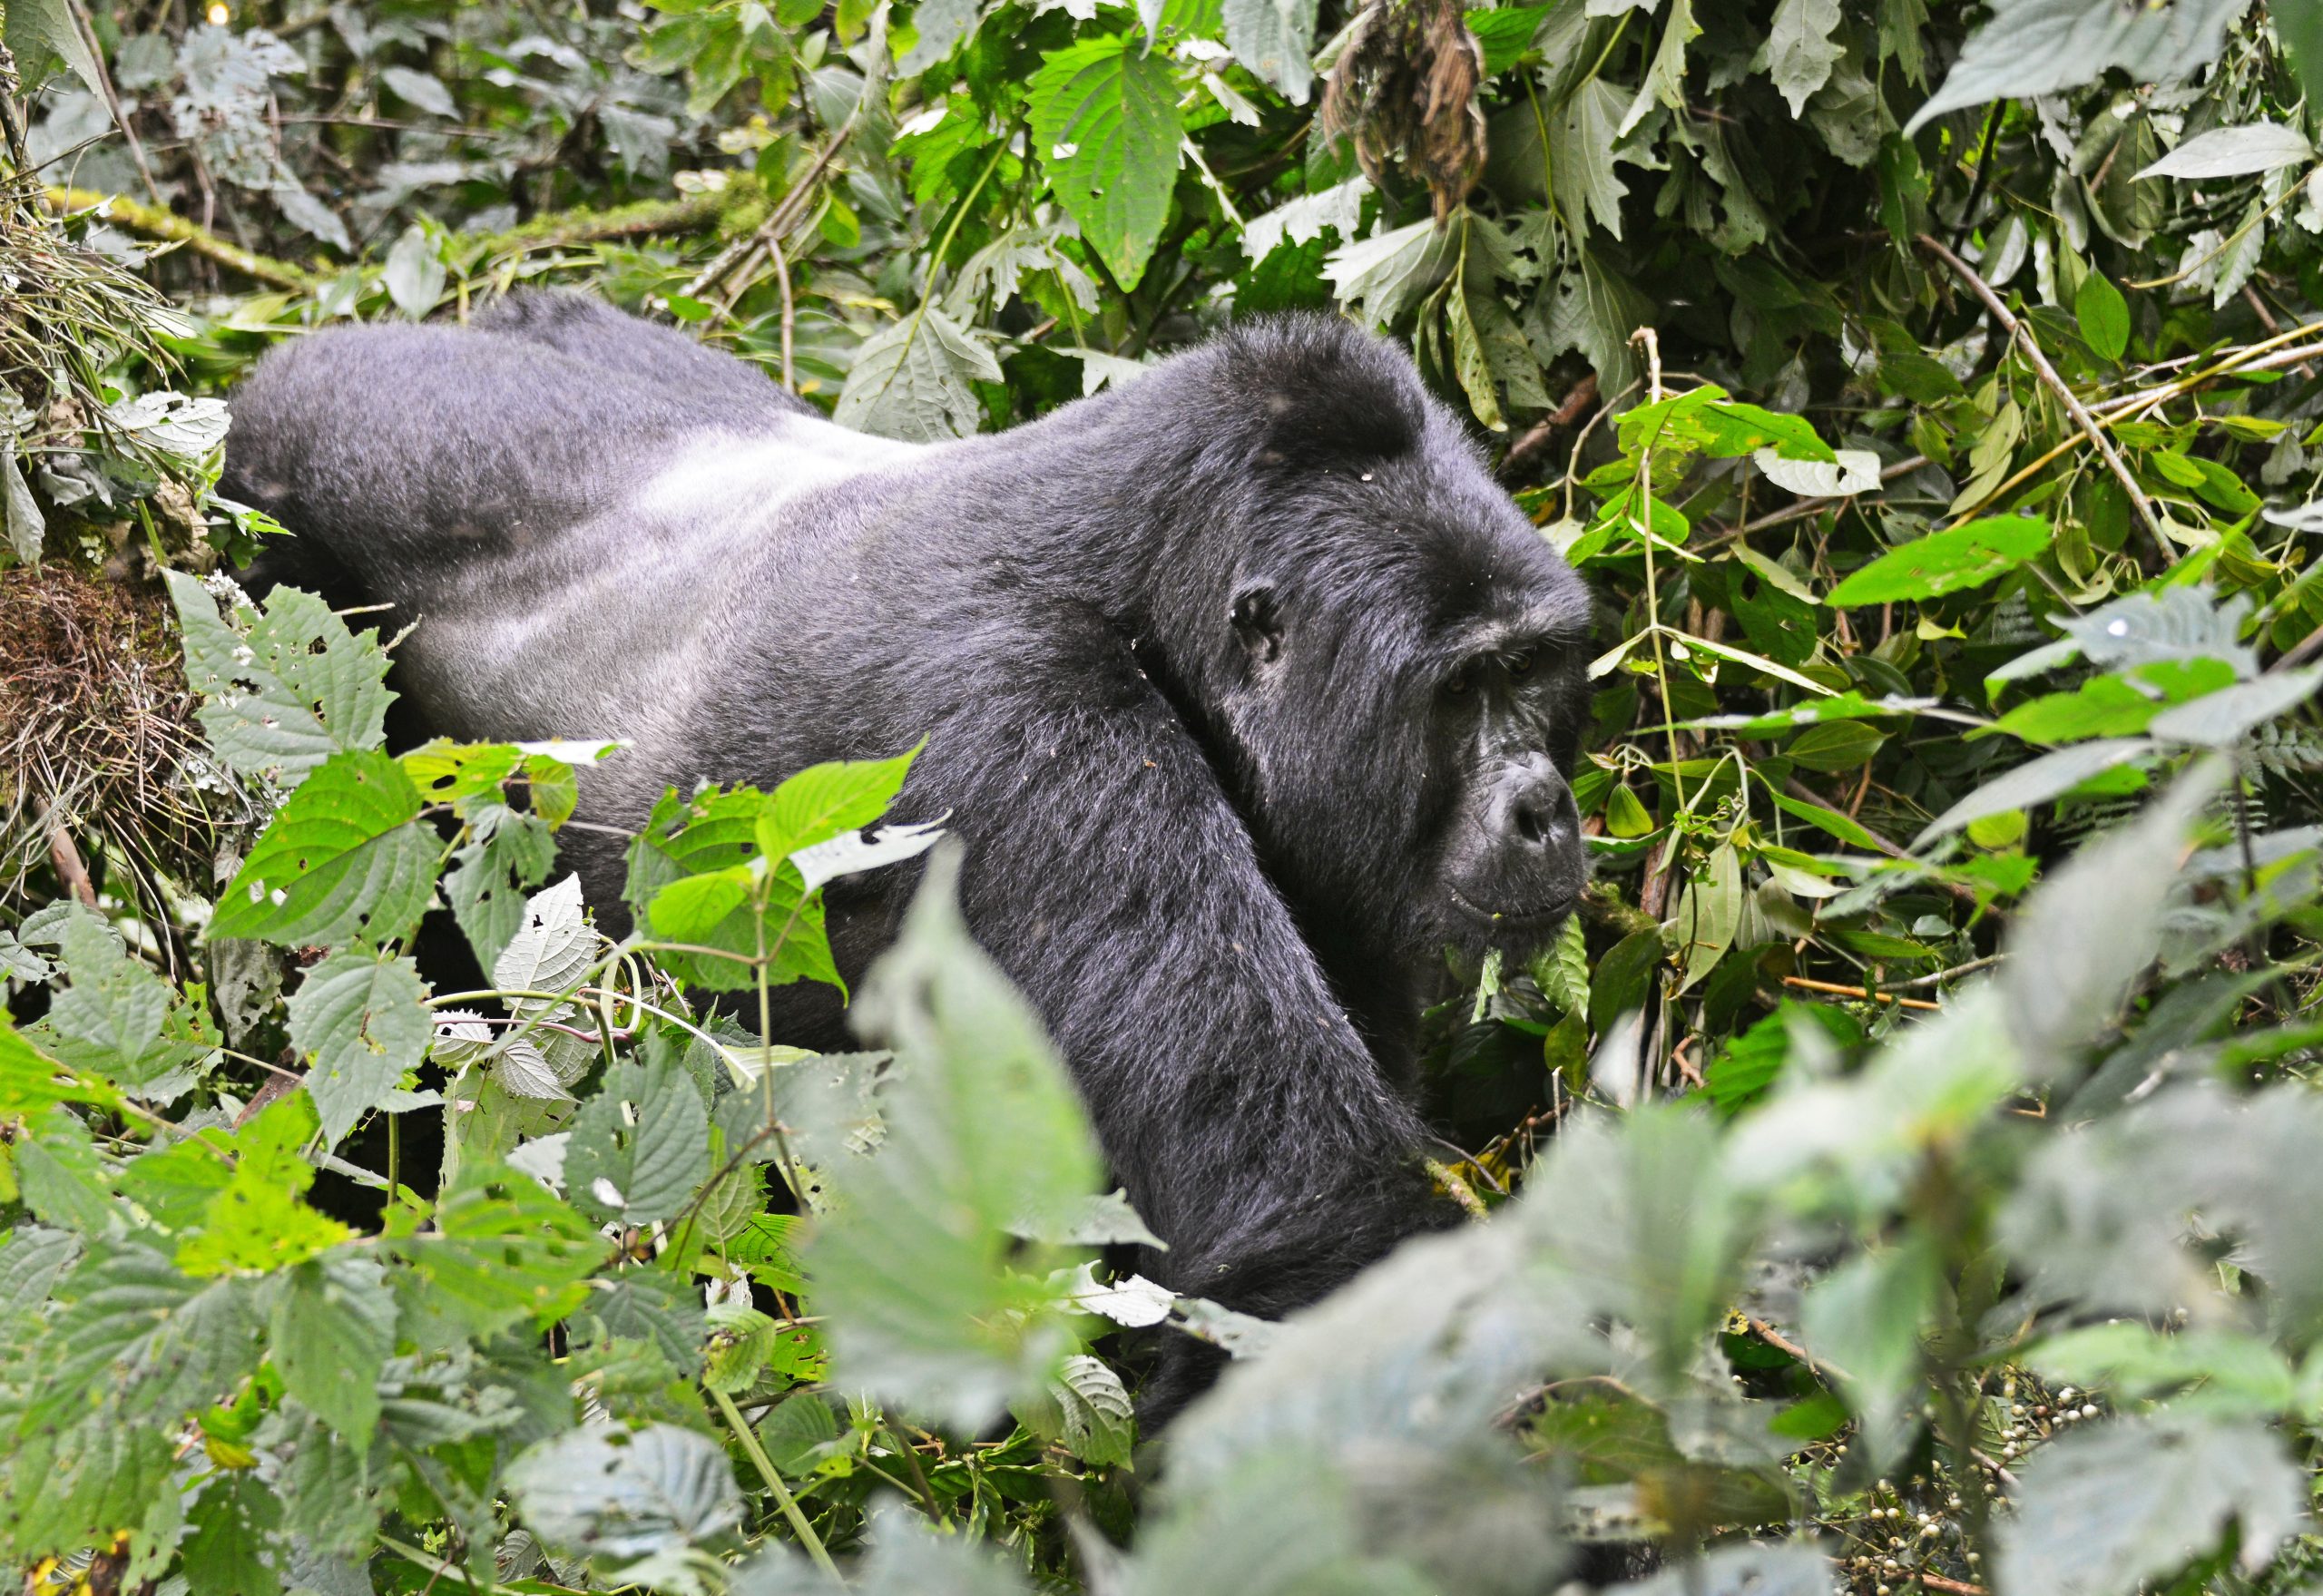 What to expect from a gorilla in Uganda?